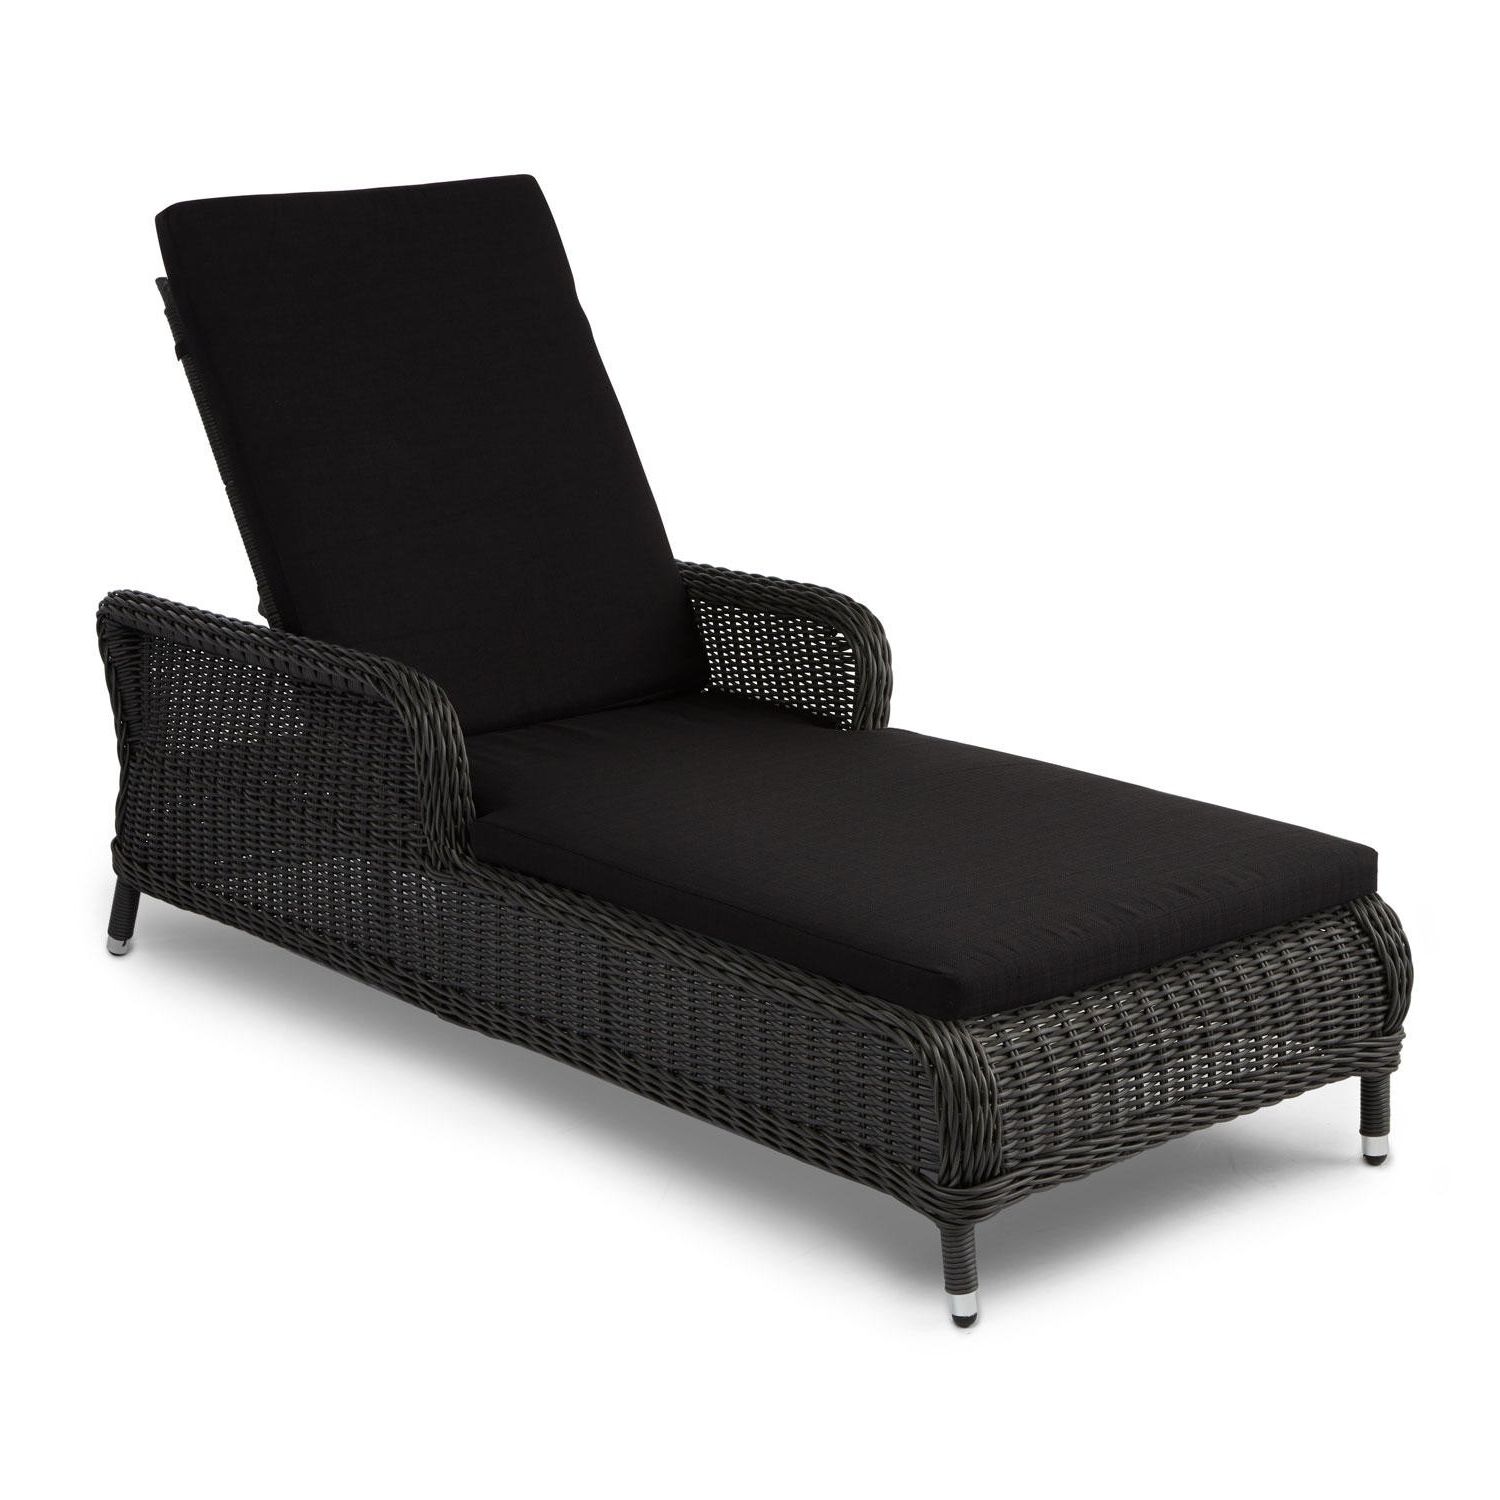 Black Chaise Lounge Chairs • Lounge Chairs Ideas Pertaining To Best And Newest Boca Chaise Lounge Outdoor Chairs With Pillows (View 8 of 15)